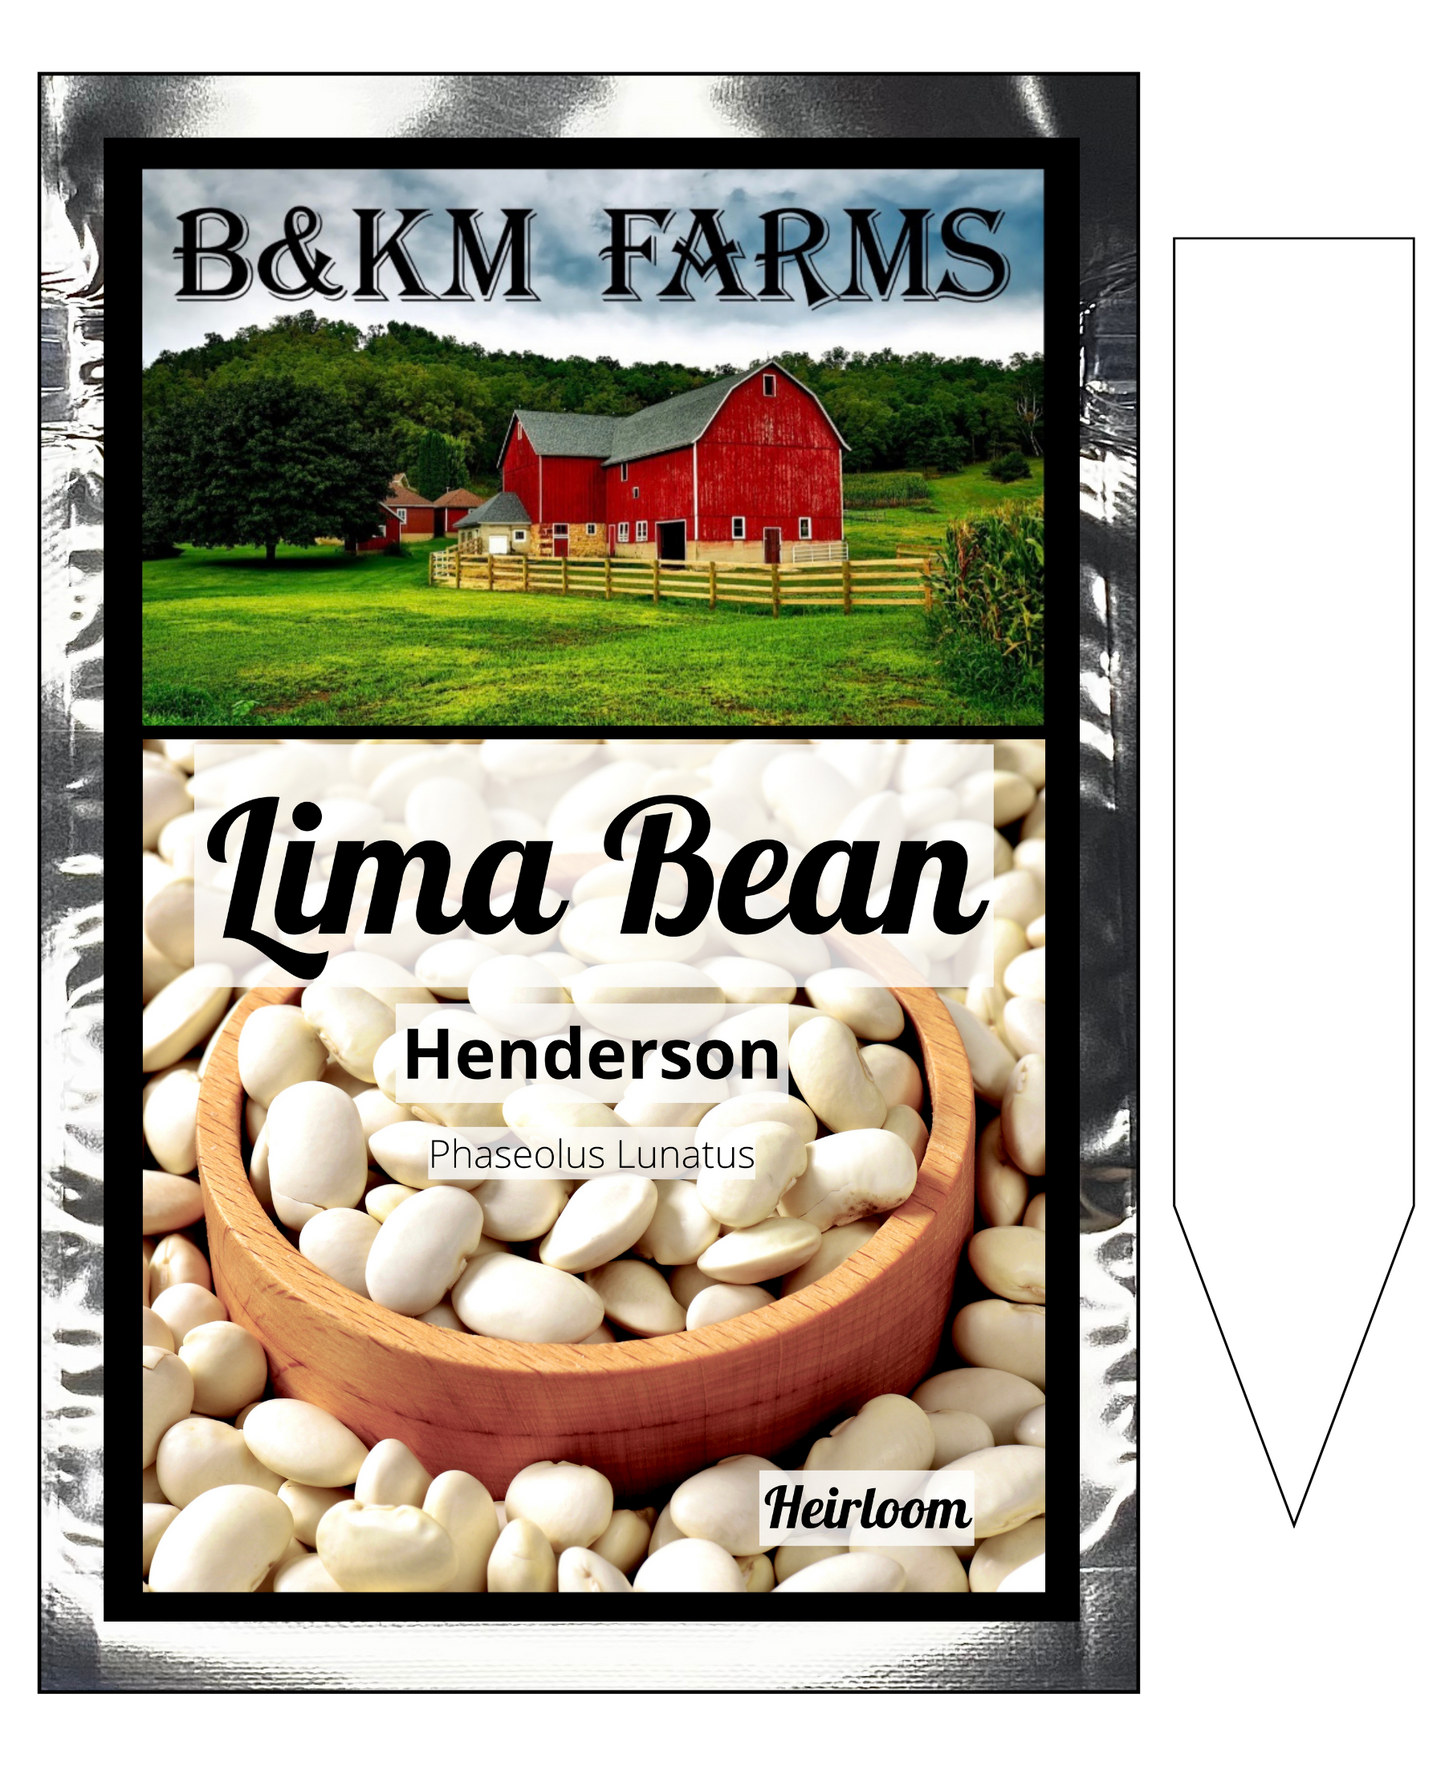 Lima Beans Henderson Bush: Buttery Treasures from Your Garden